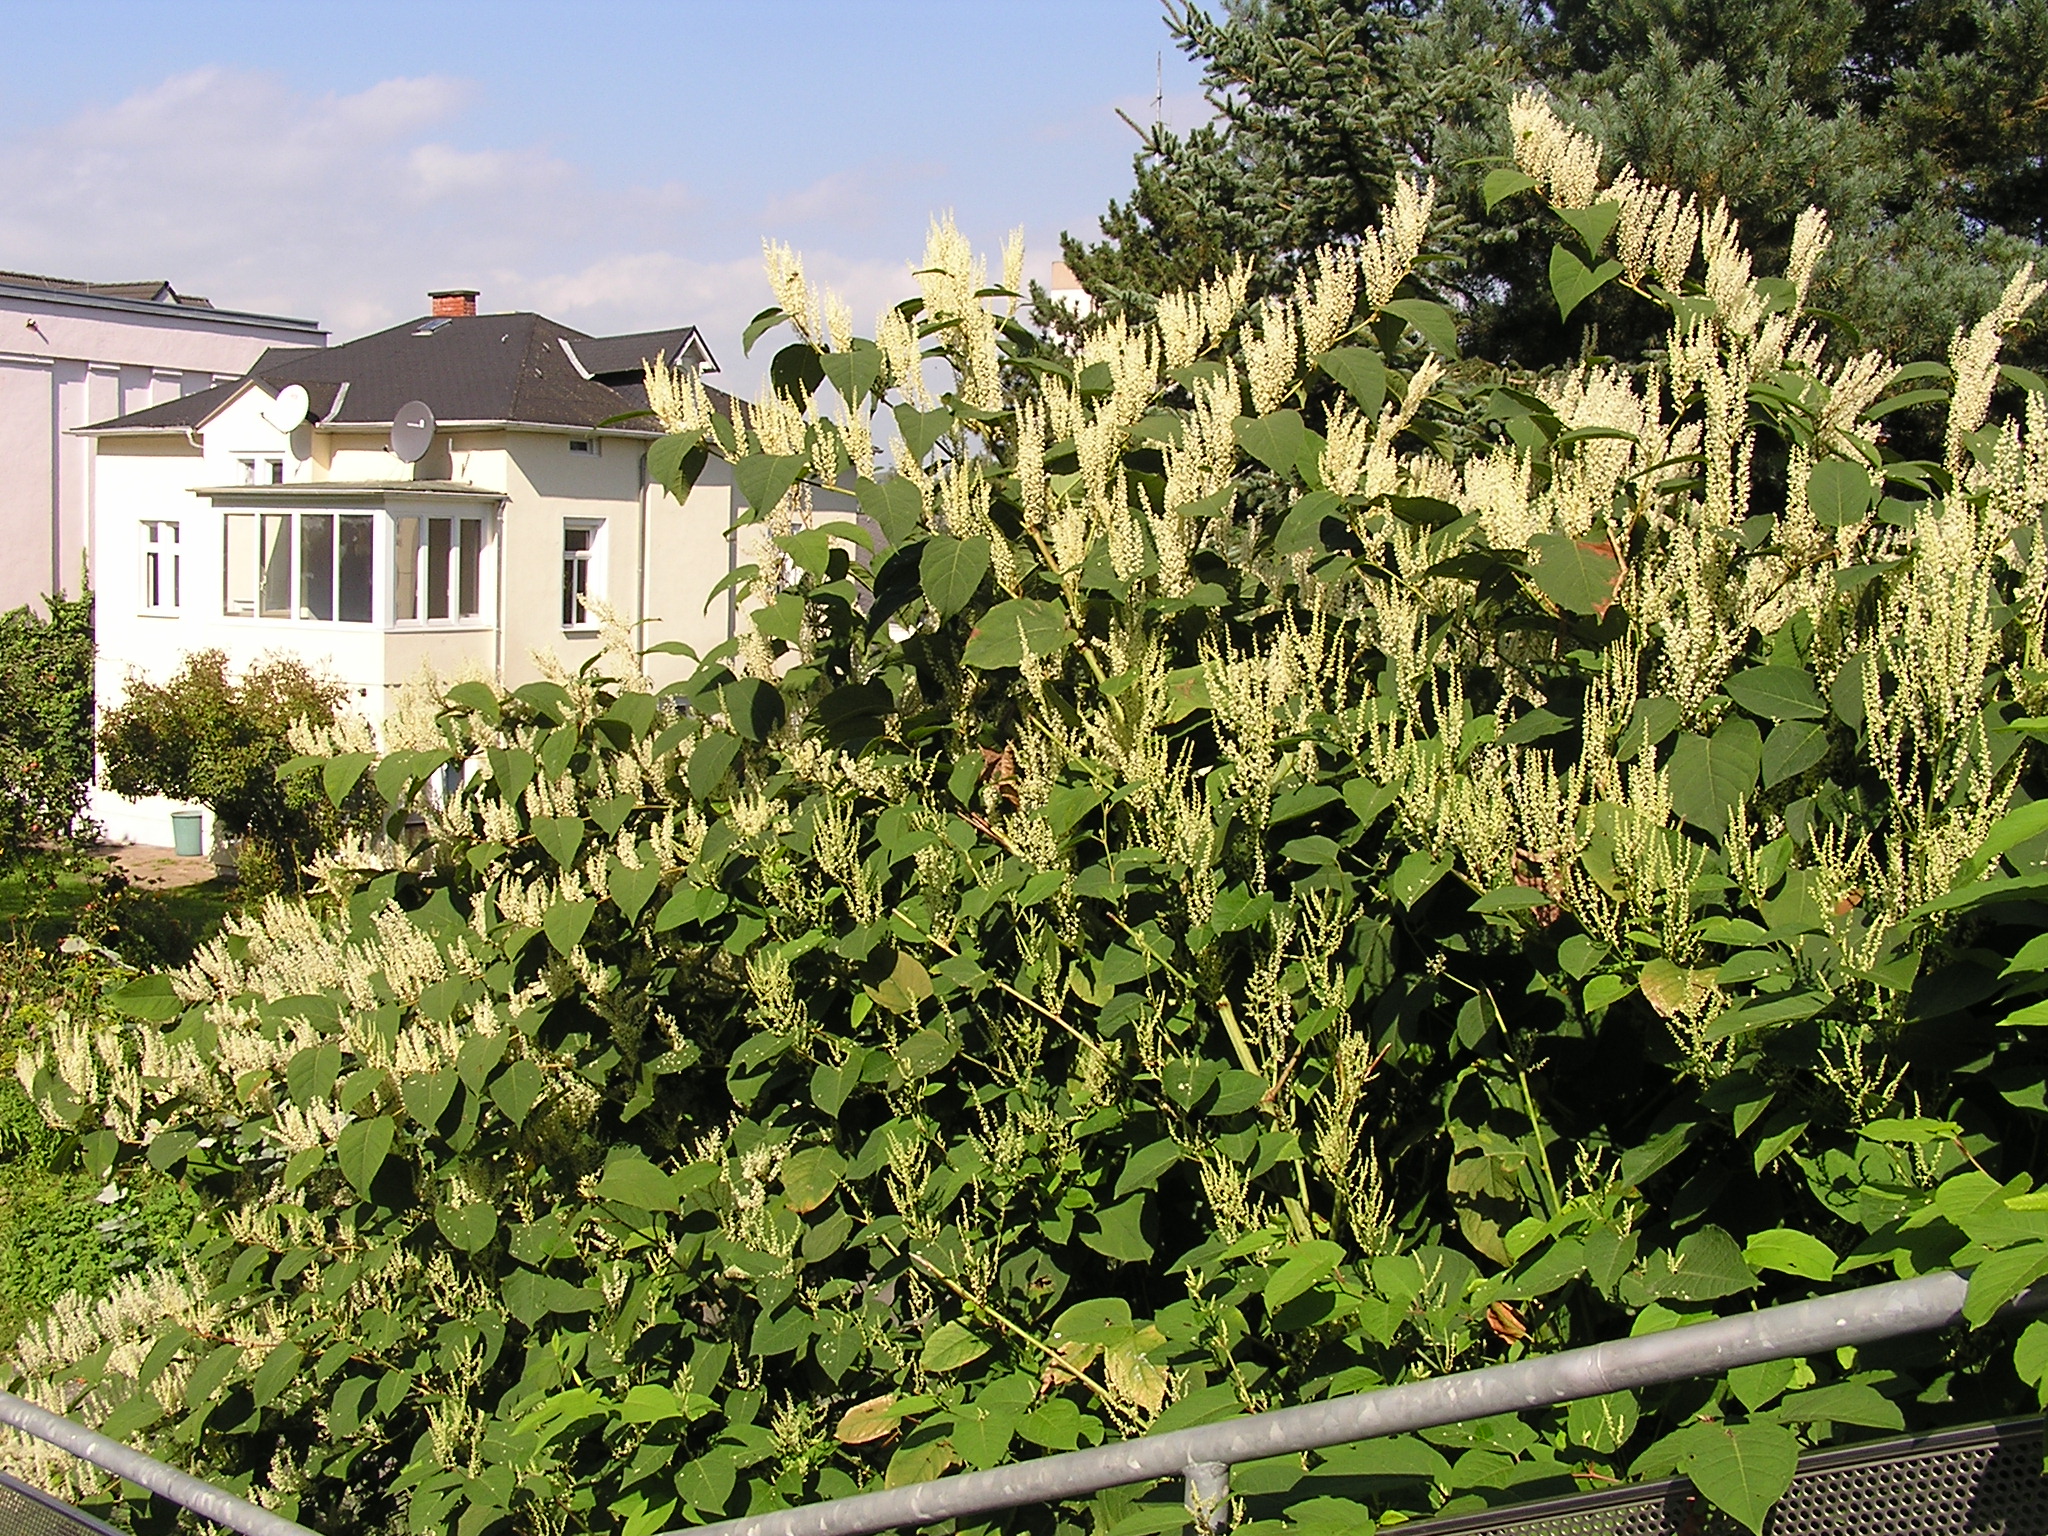 Heatmap reveals worst places in London for Japanese knotweed